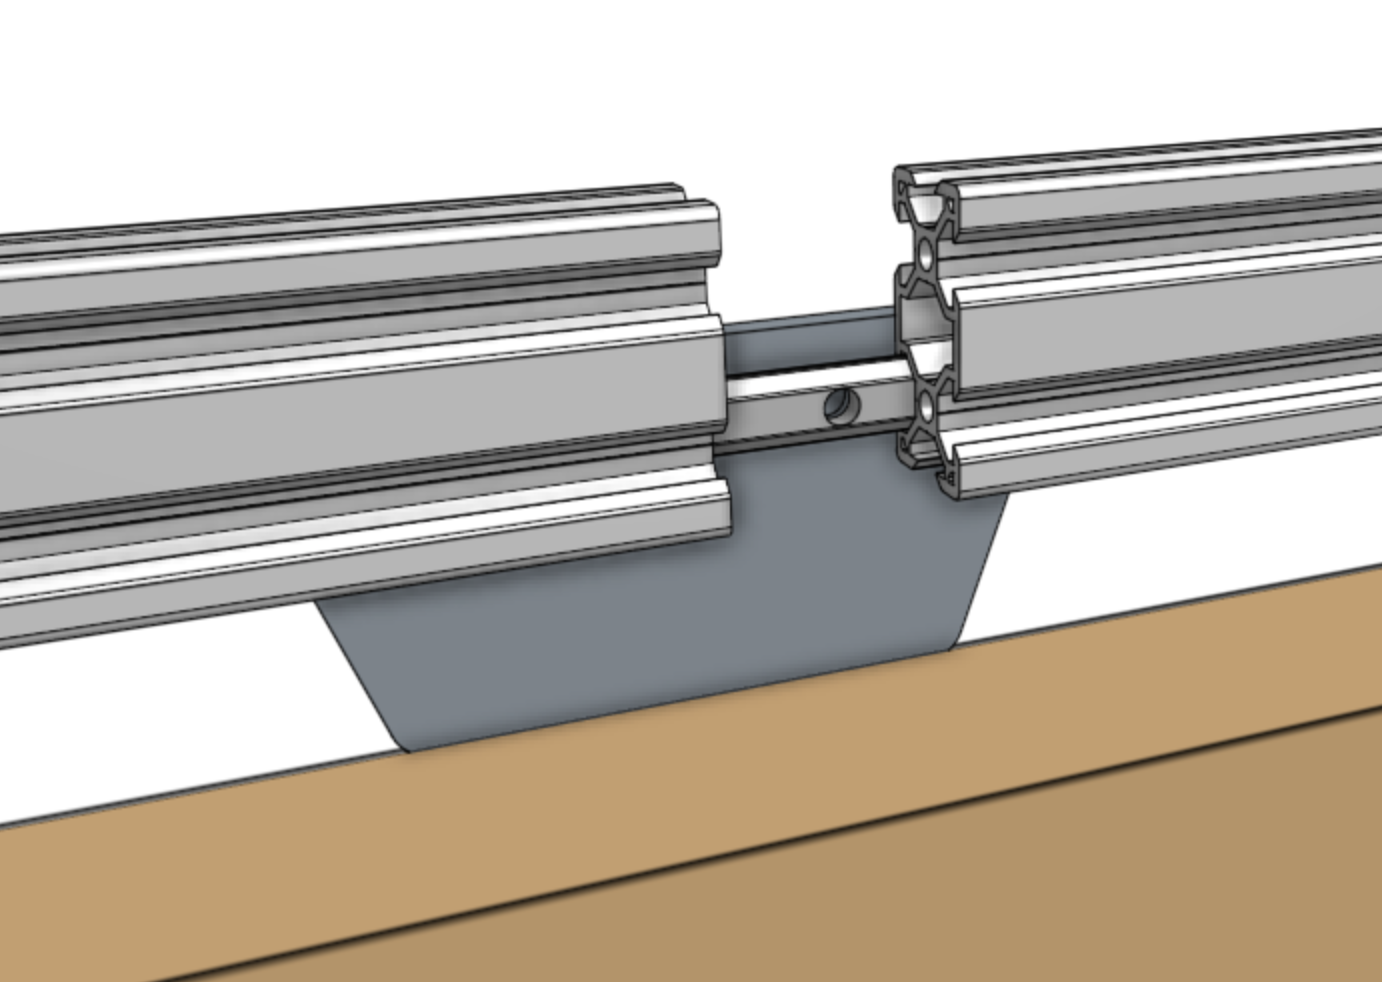 Mount the second track extrusion